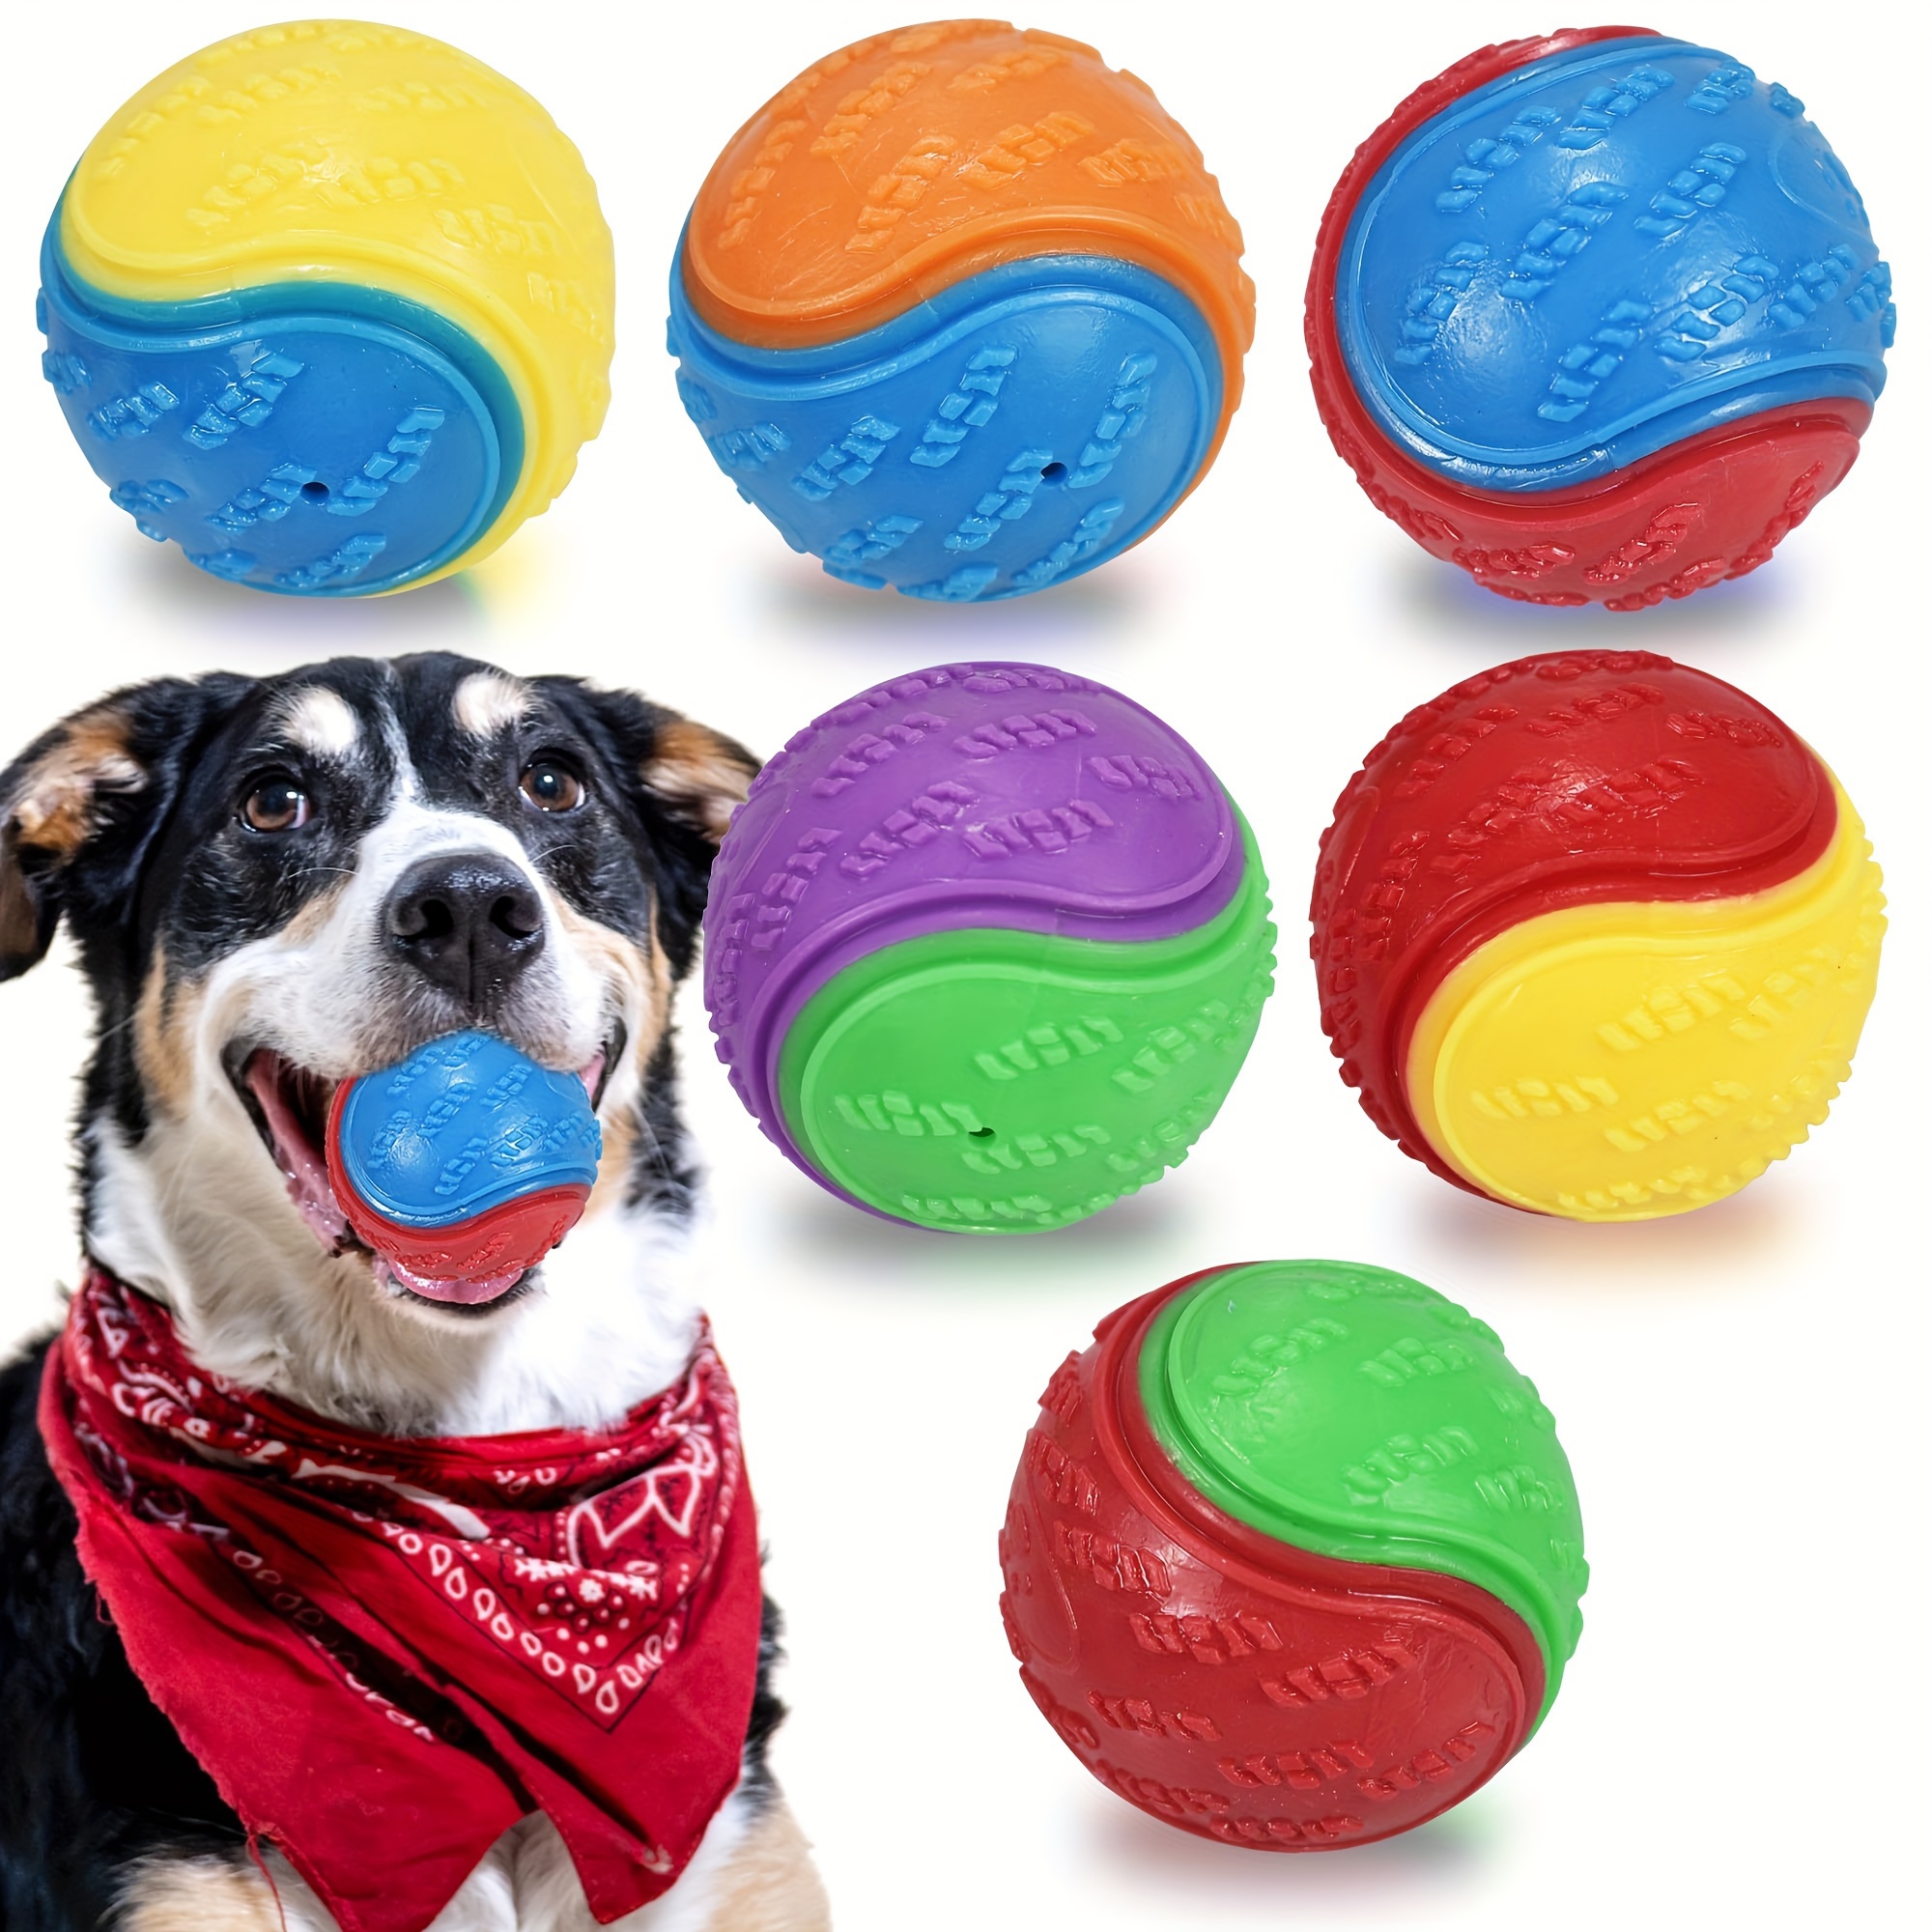 

1/6pcs Squeaky Dog Balls, Dog Toys Balls For Training, Tough Ball Toys For Dogs, Fit With Dog Ball Launcher, High Bouncy Dog Ball For Interactive Playing, Puppy Pet Chew Balls Teething Balls